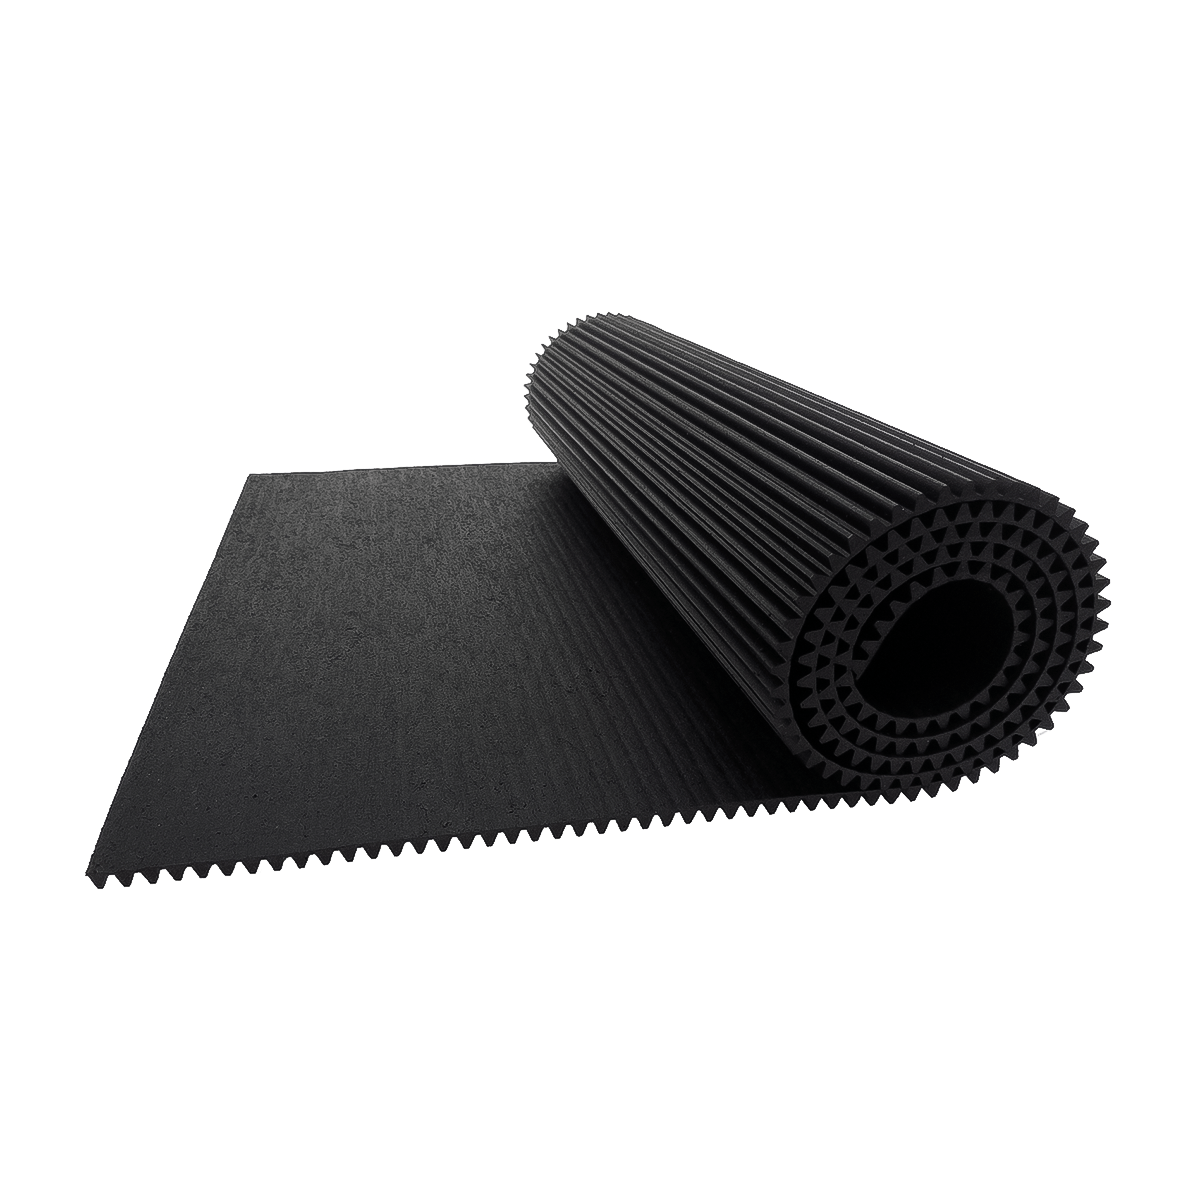 DEEP RIBBED RUBBER MATTING 12 X 24 inches